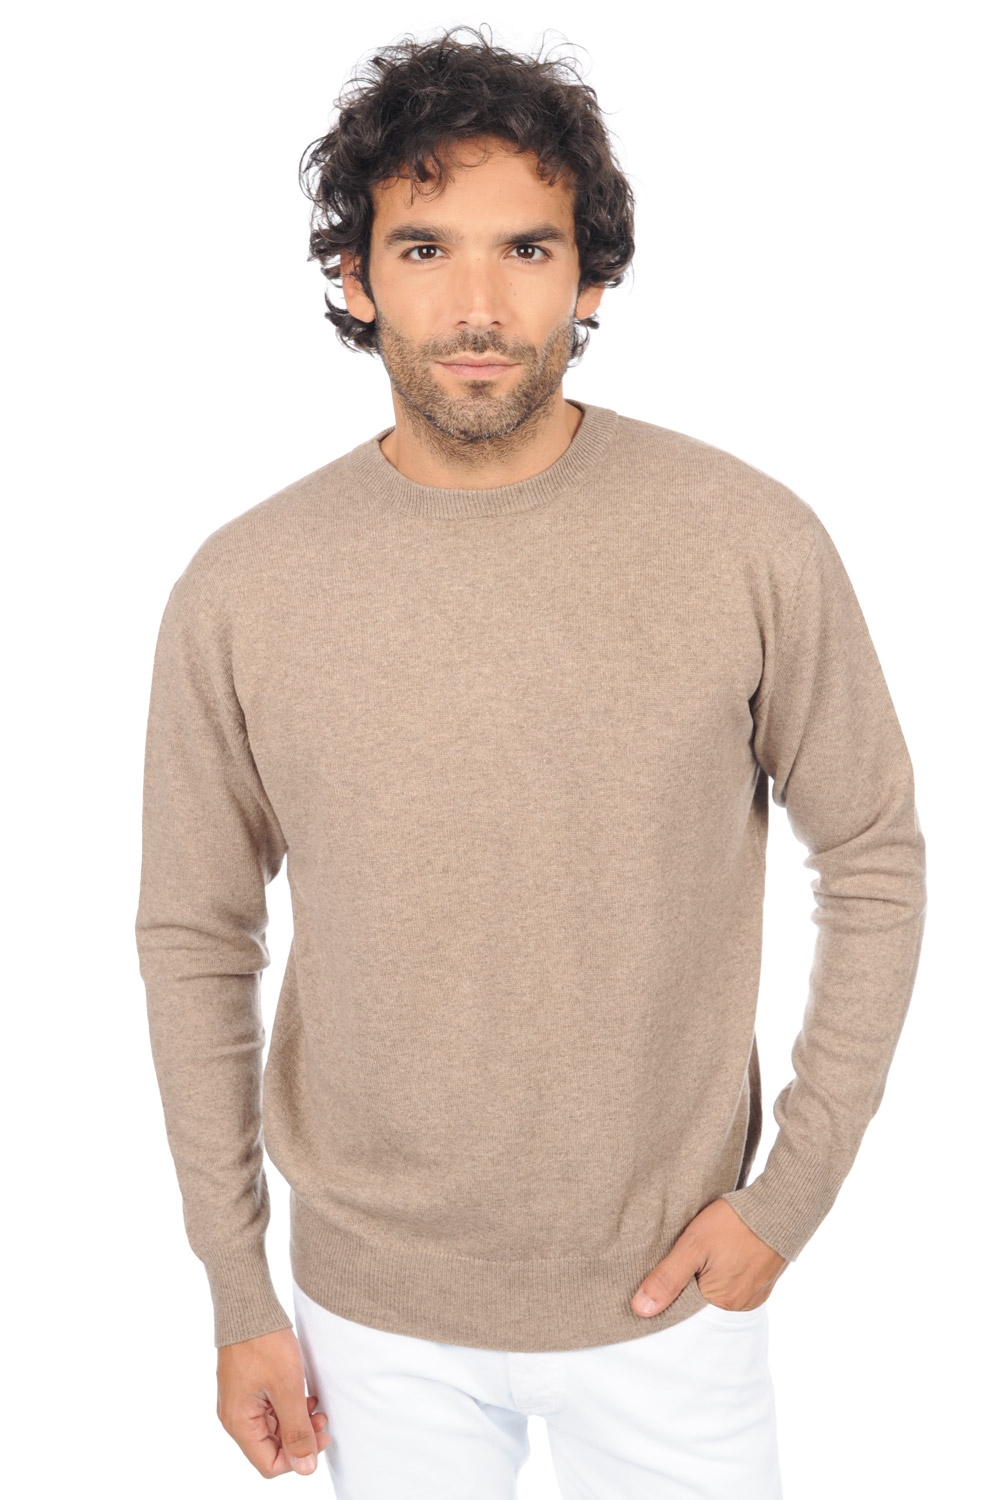 Cachemire pull homme col rond nestor premium dolma natural 4xl